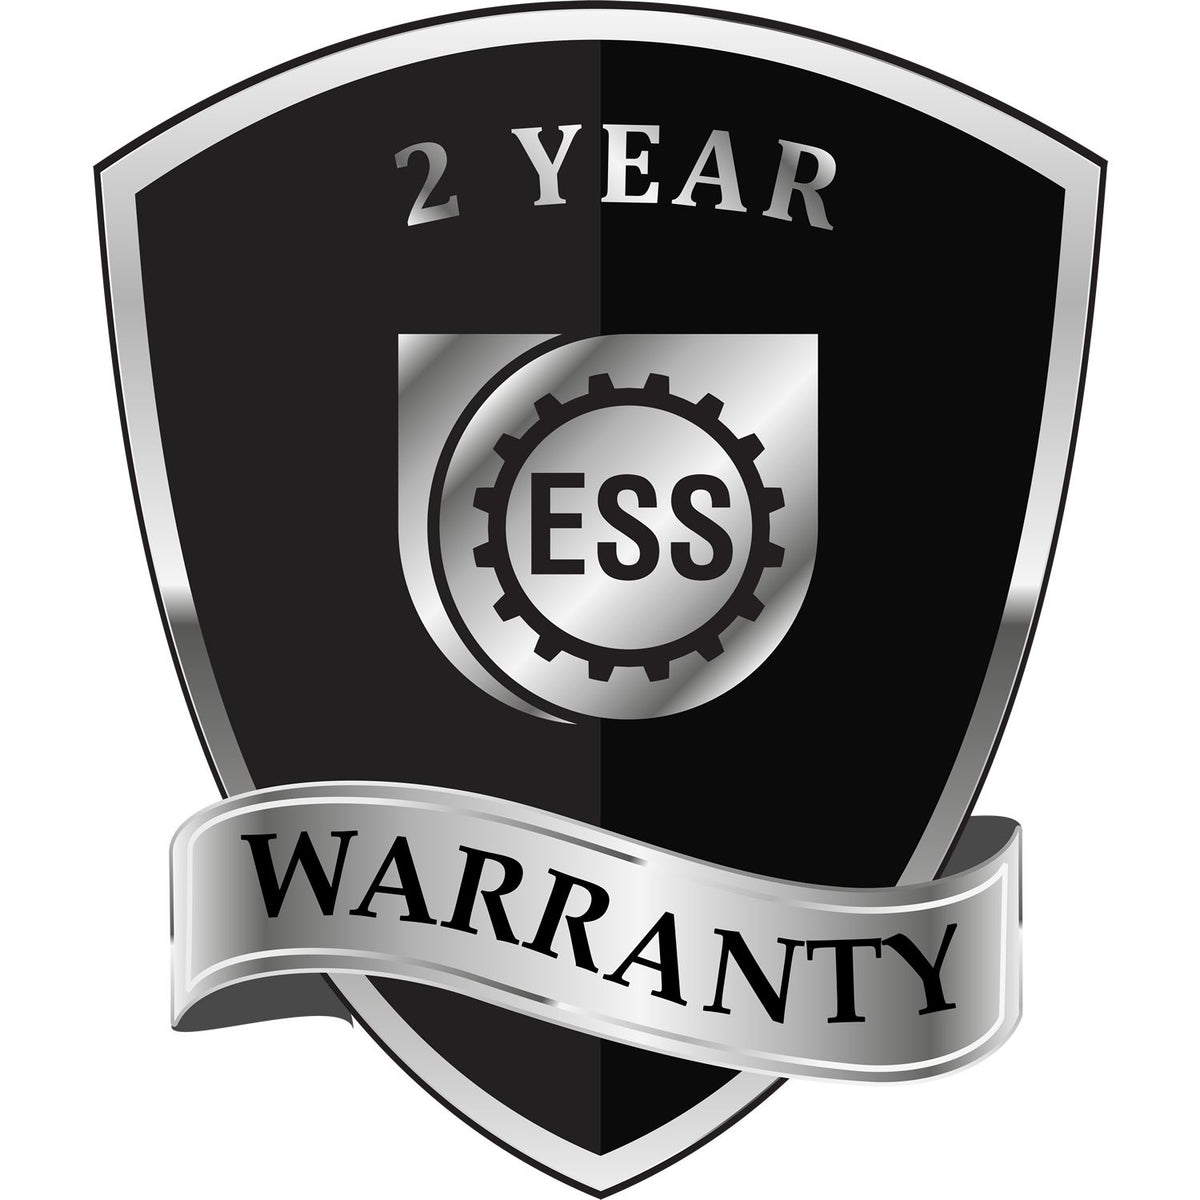 A black and silver badge or emblem showing warranty information for the Gift Washington Landscape Architect Seal